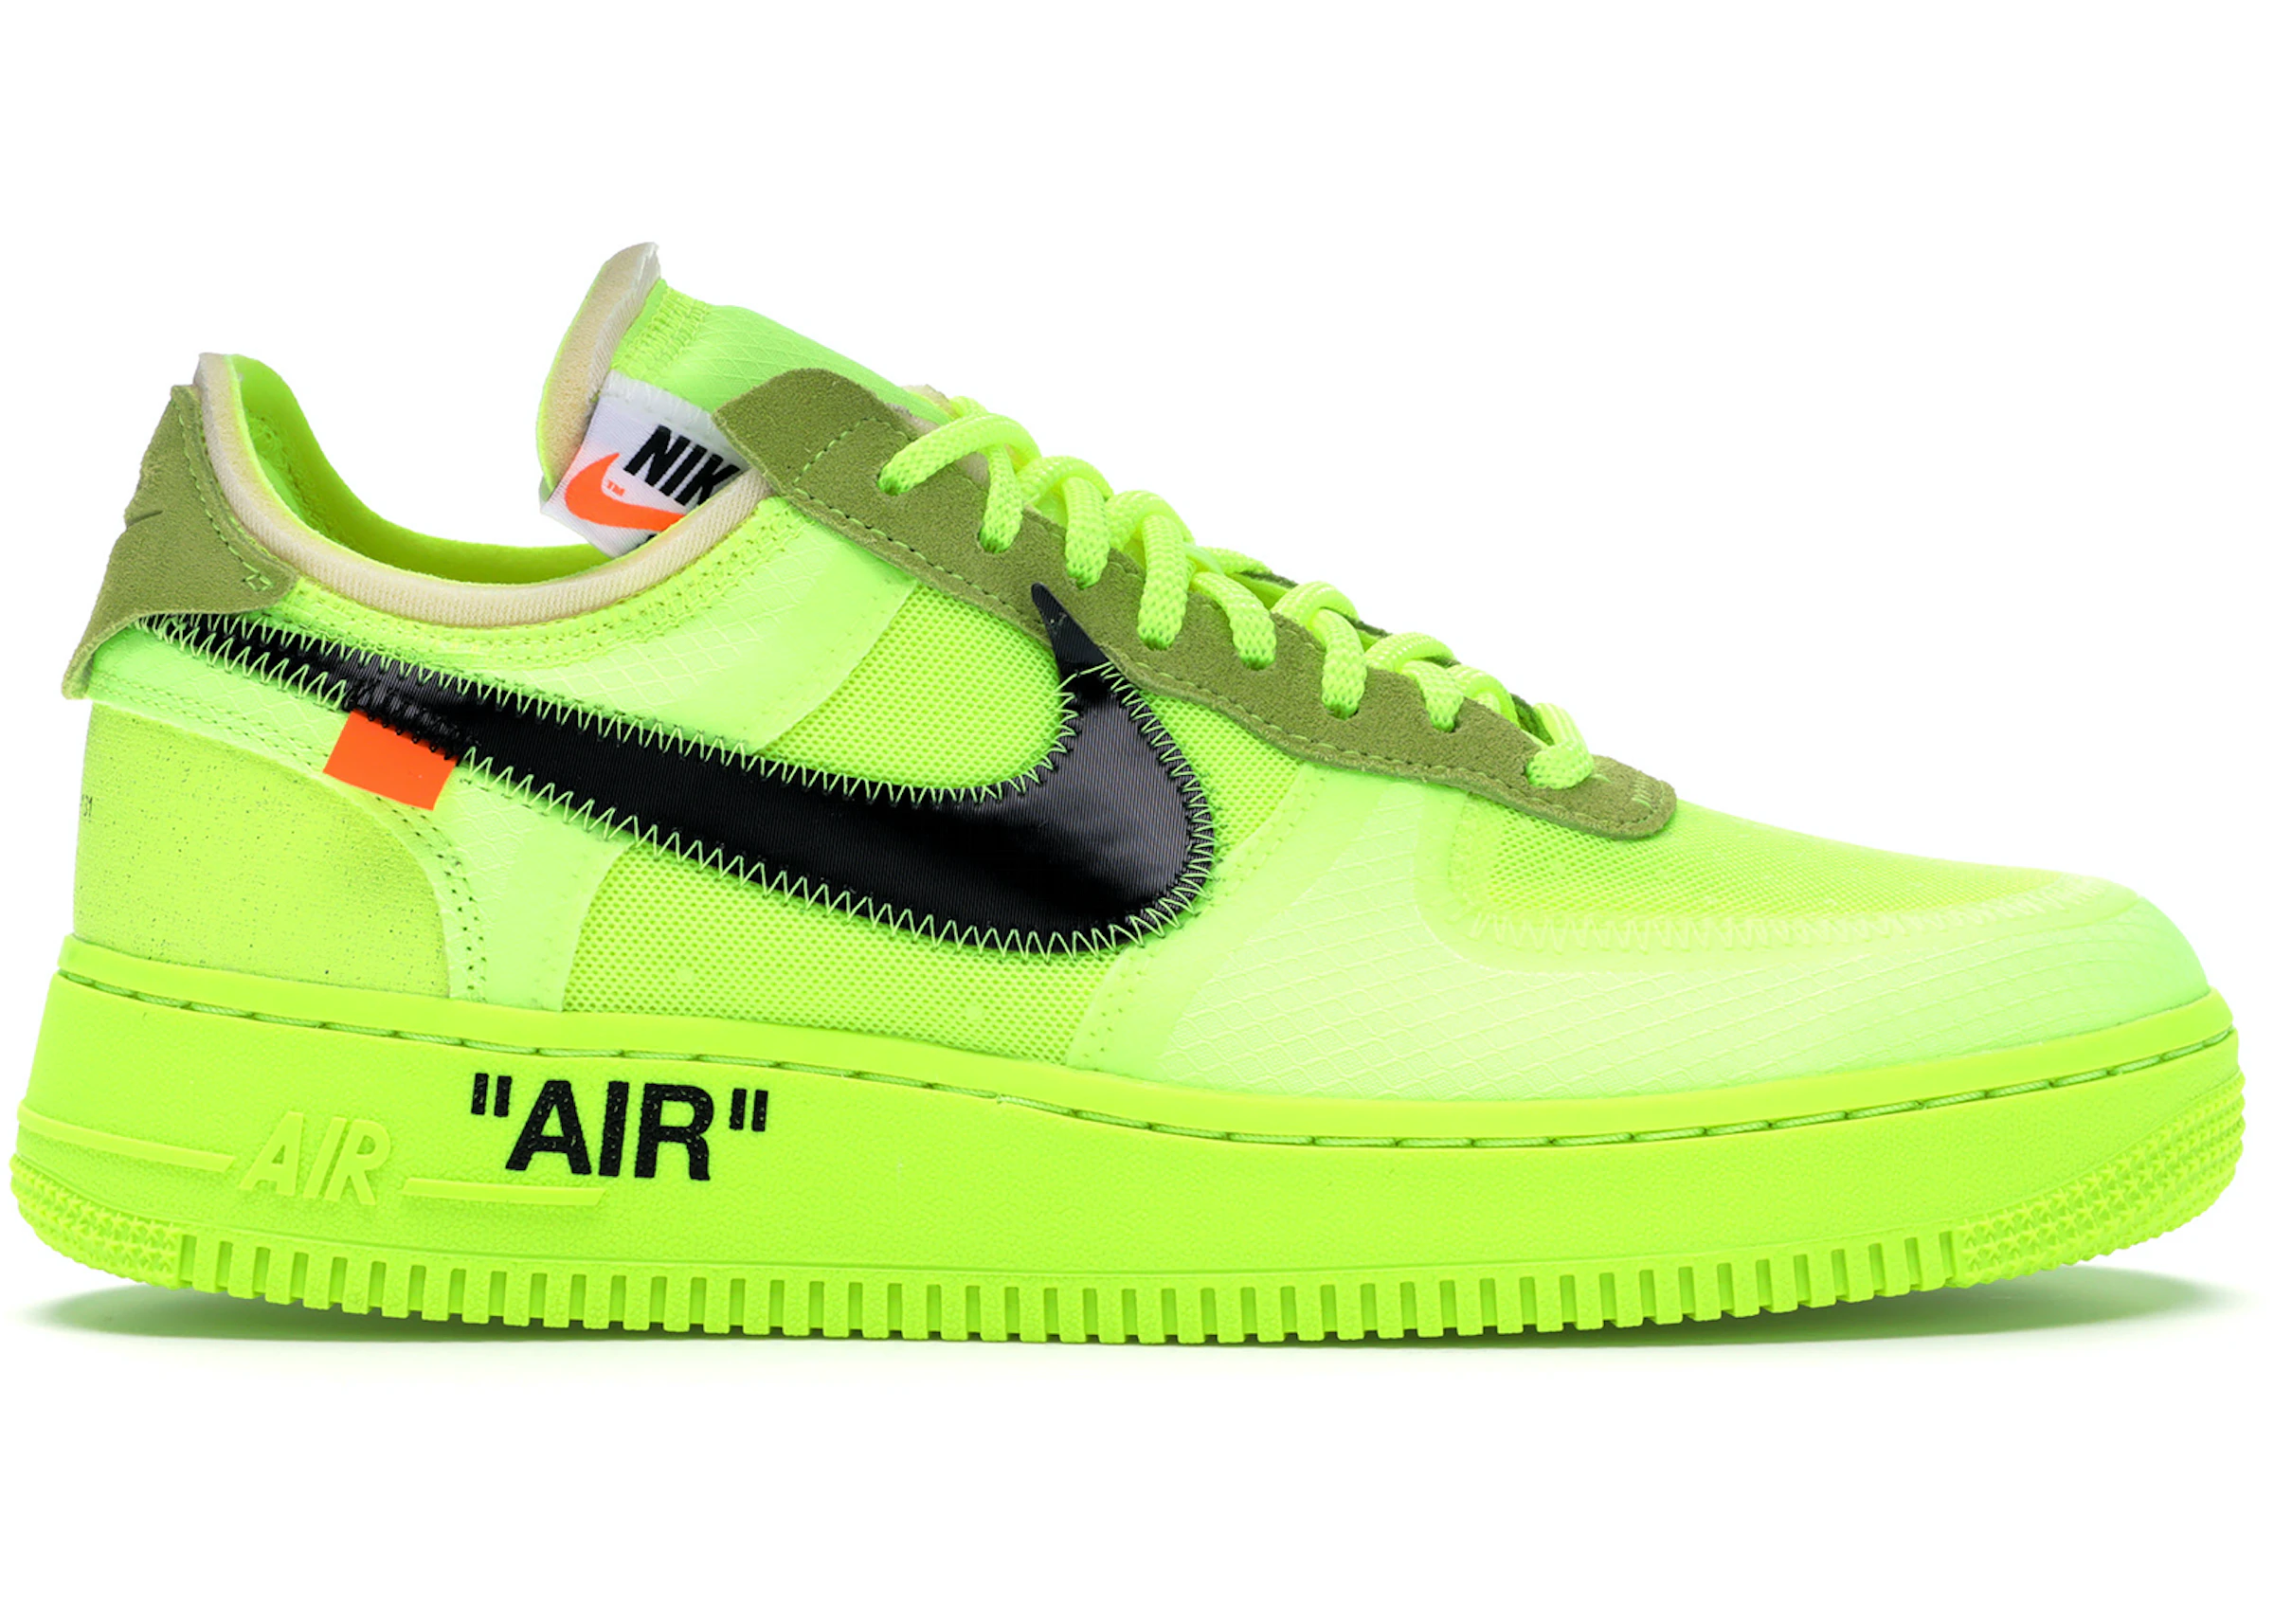 Businessman tube history Nike Air Force 1 Low Off-White Volt - AO4606-700 - US